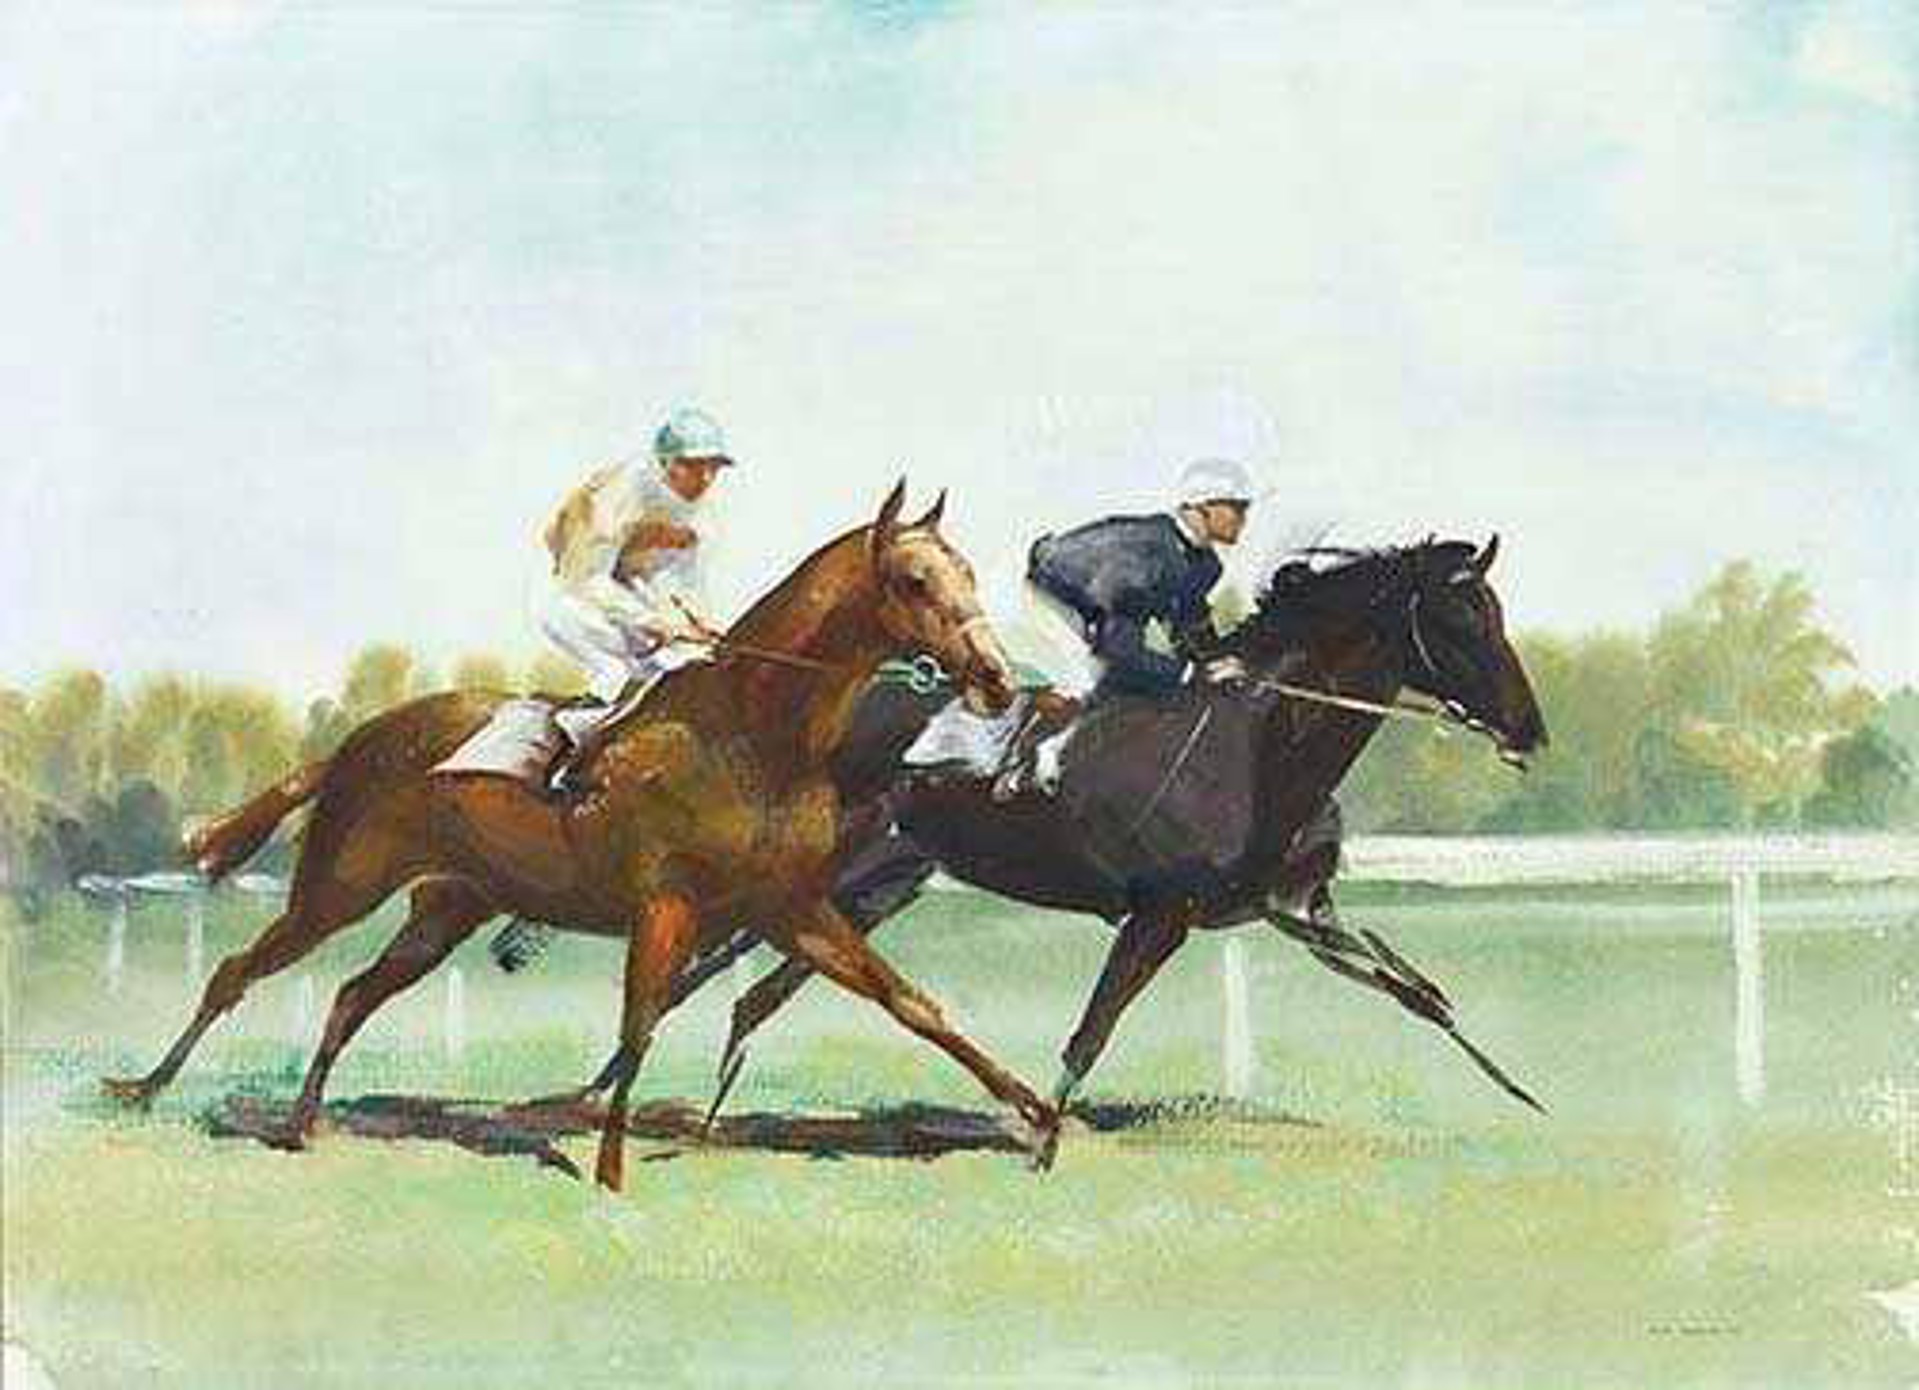 Spring Meeting Lord Derby's Filly by a Half by John R. Skeaping